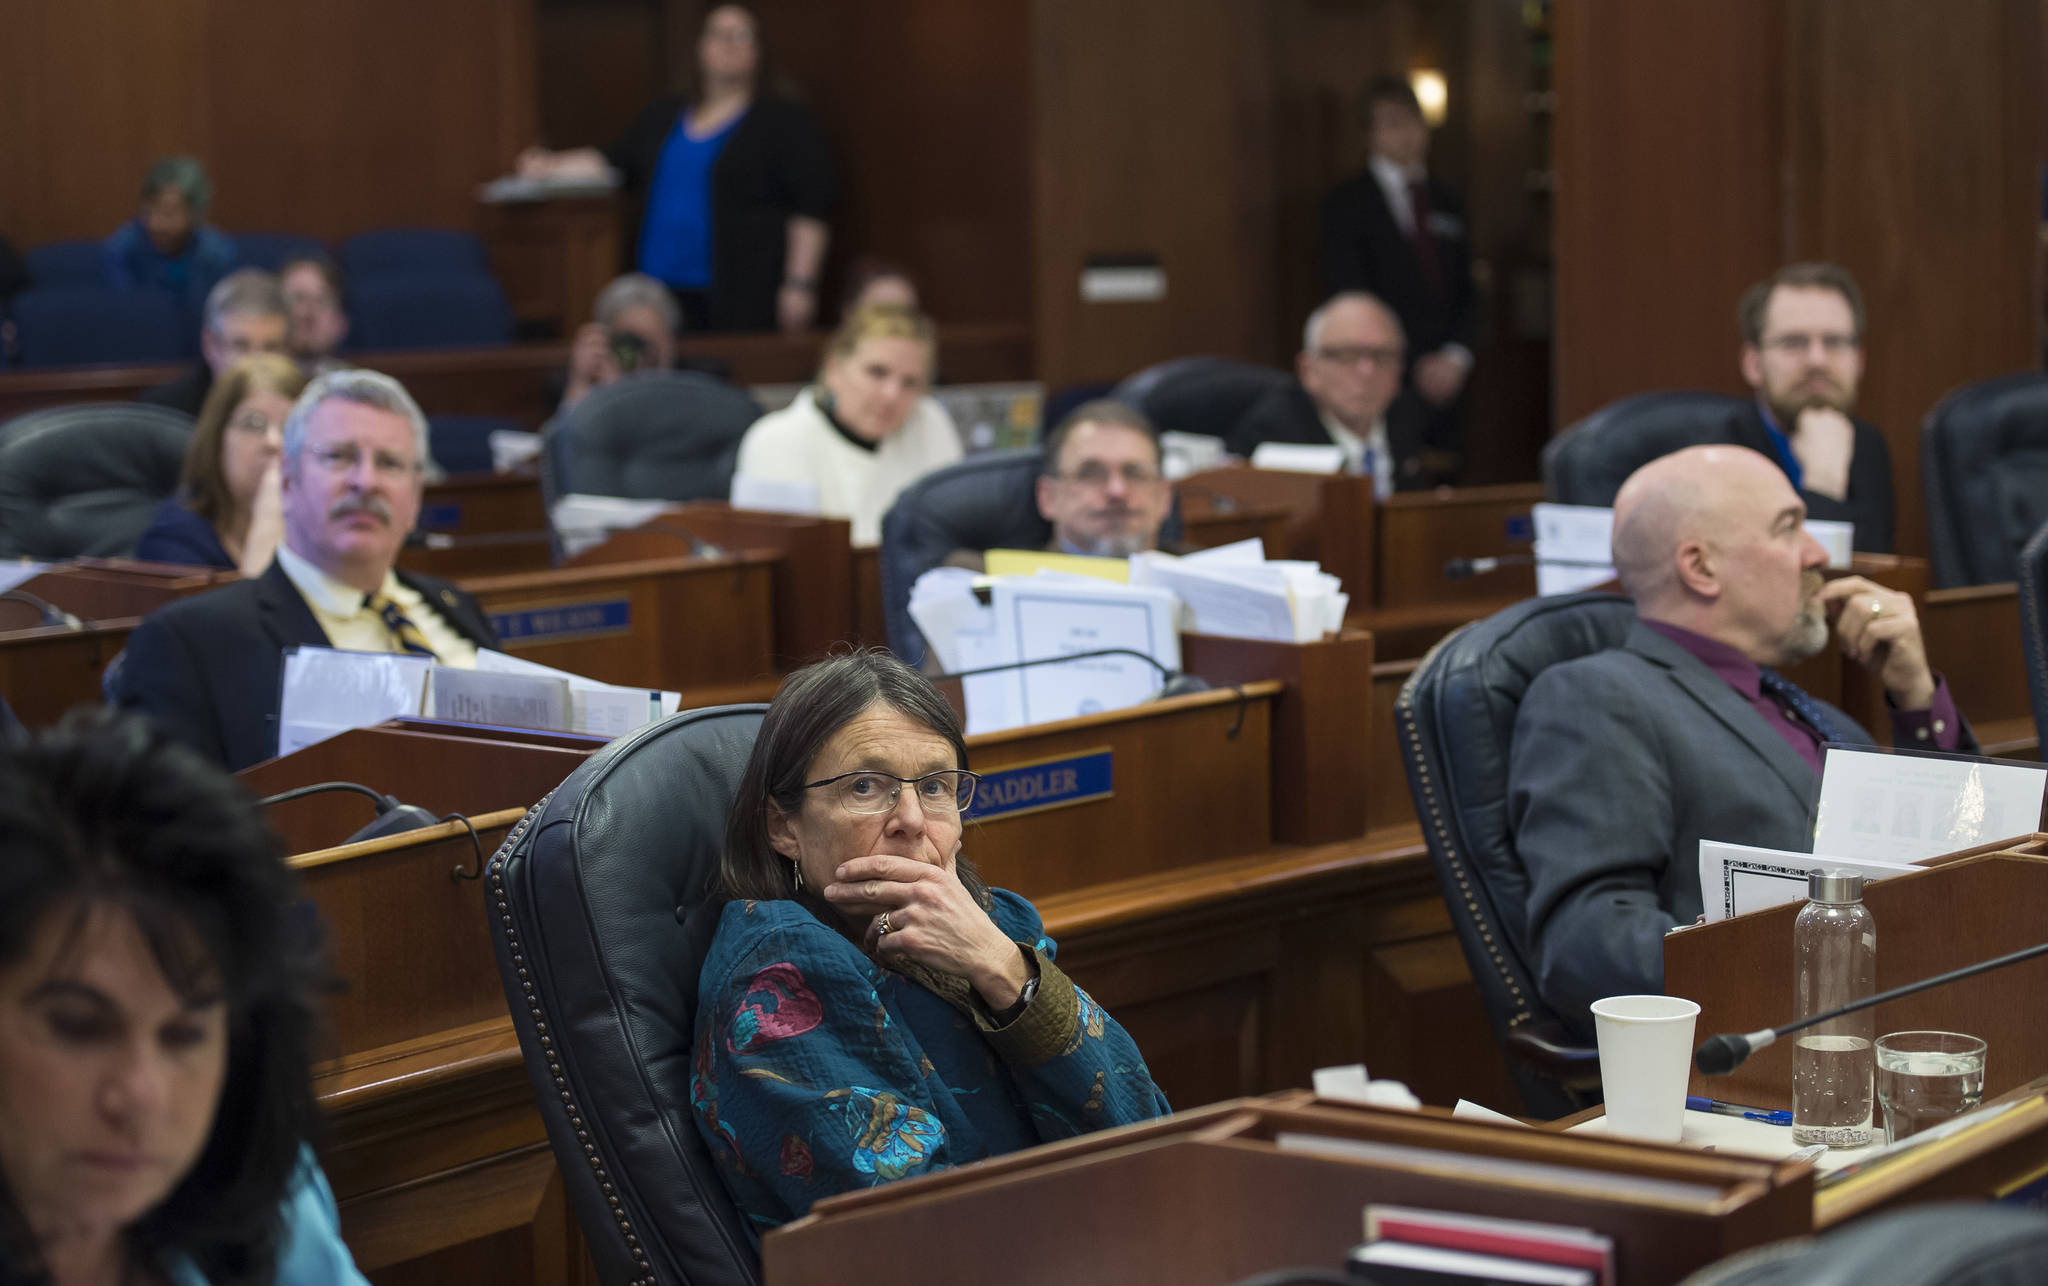 Members of the House of Representatives watch the vote on the state’s operating budget bill at the Capitol on Monday, April 2, 2018. The House passed the bill along caucus lines. (Michael Penn